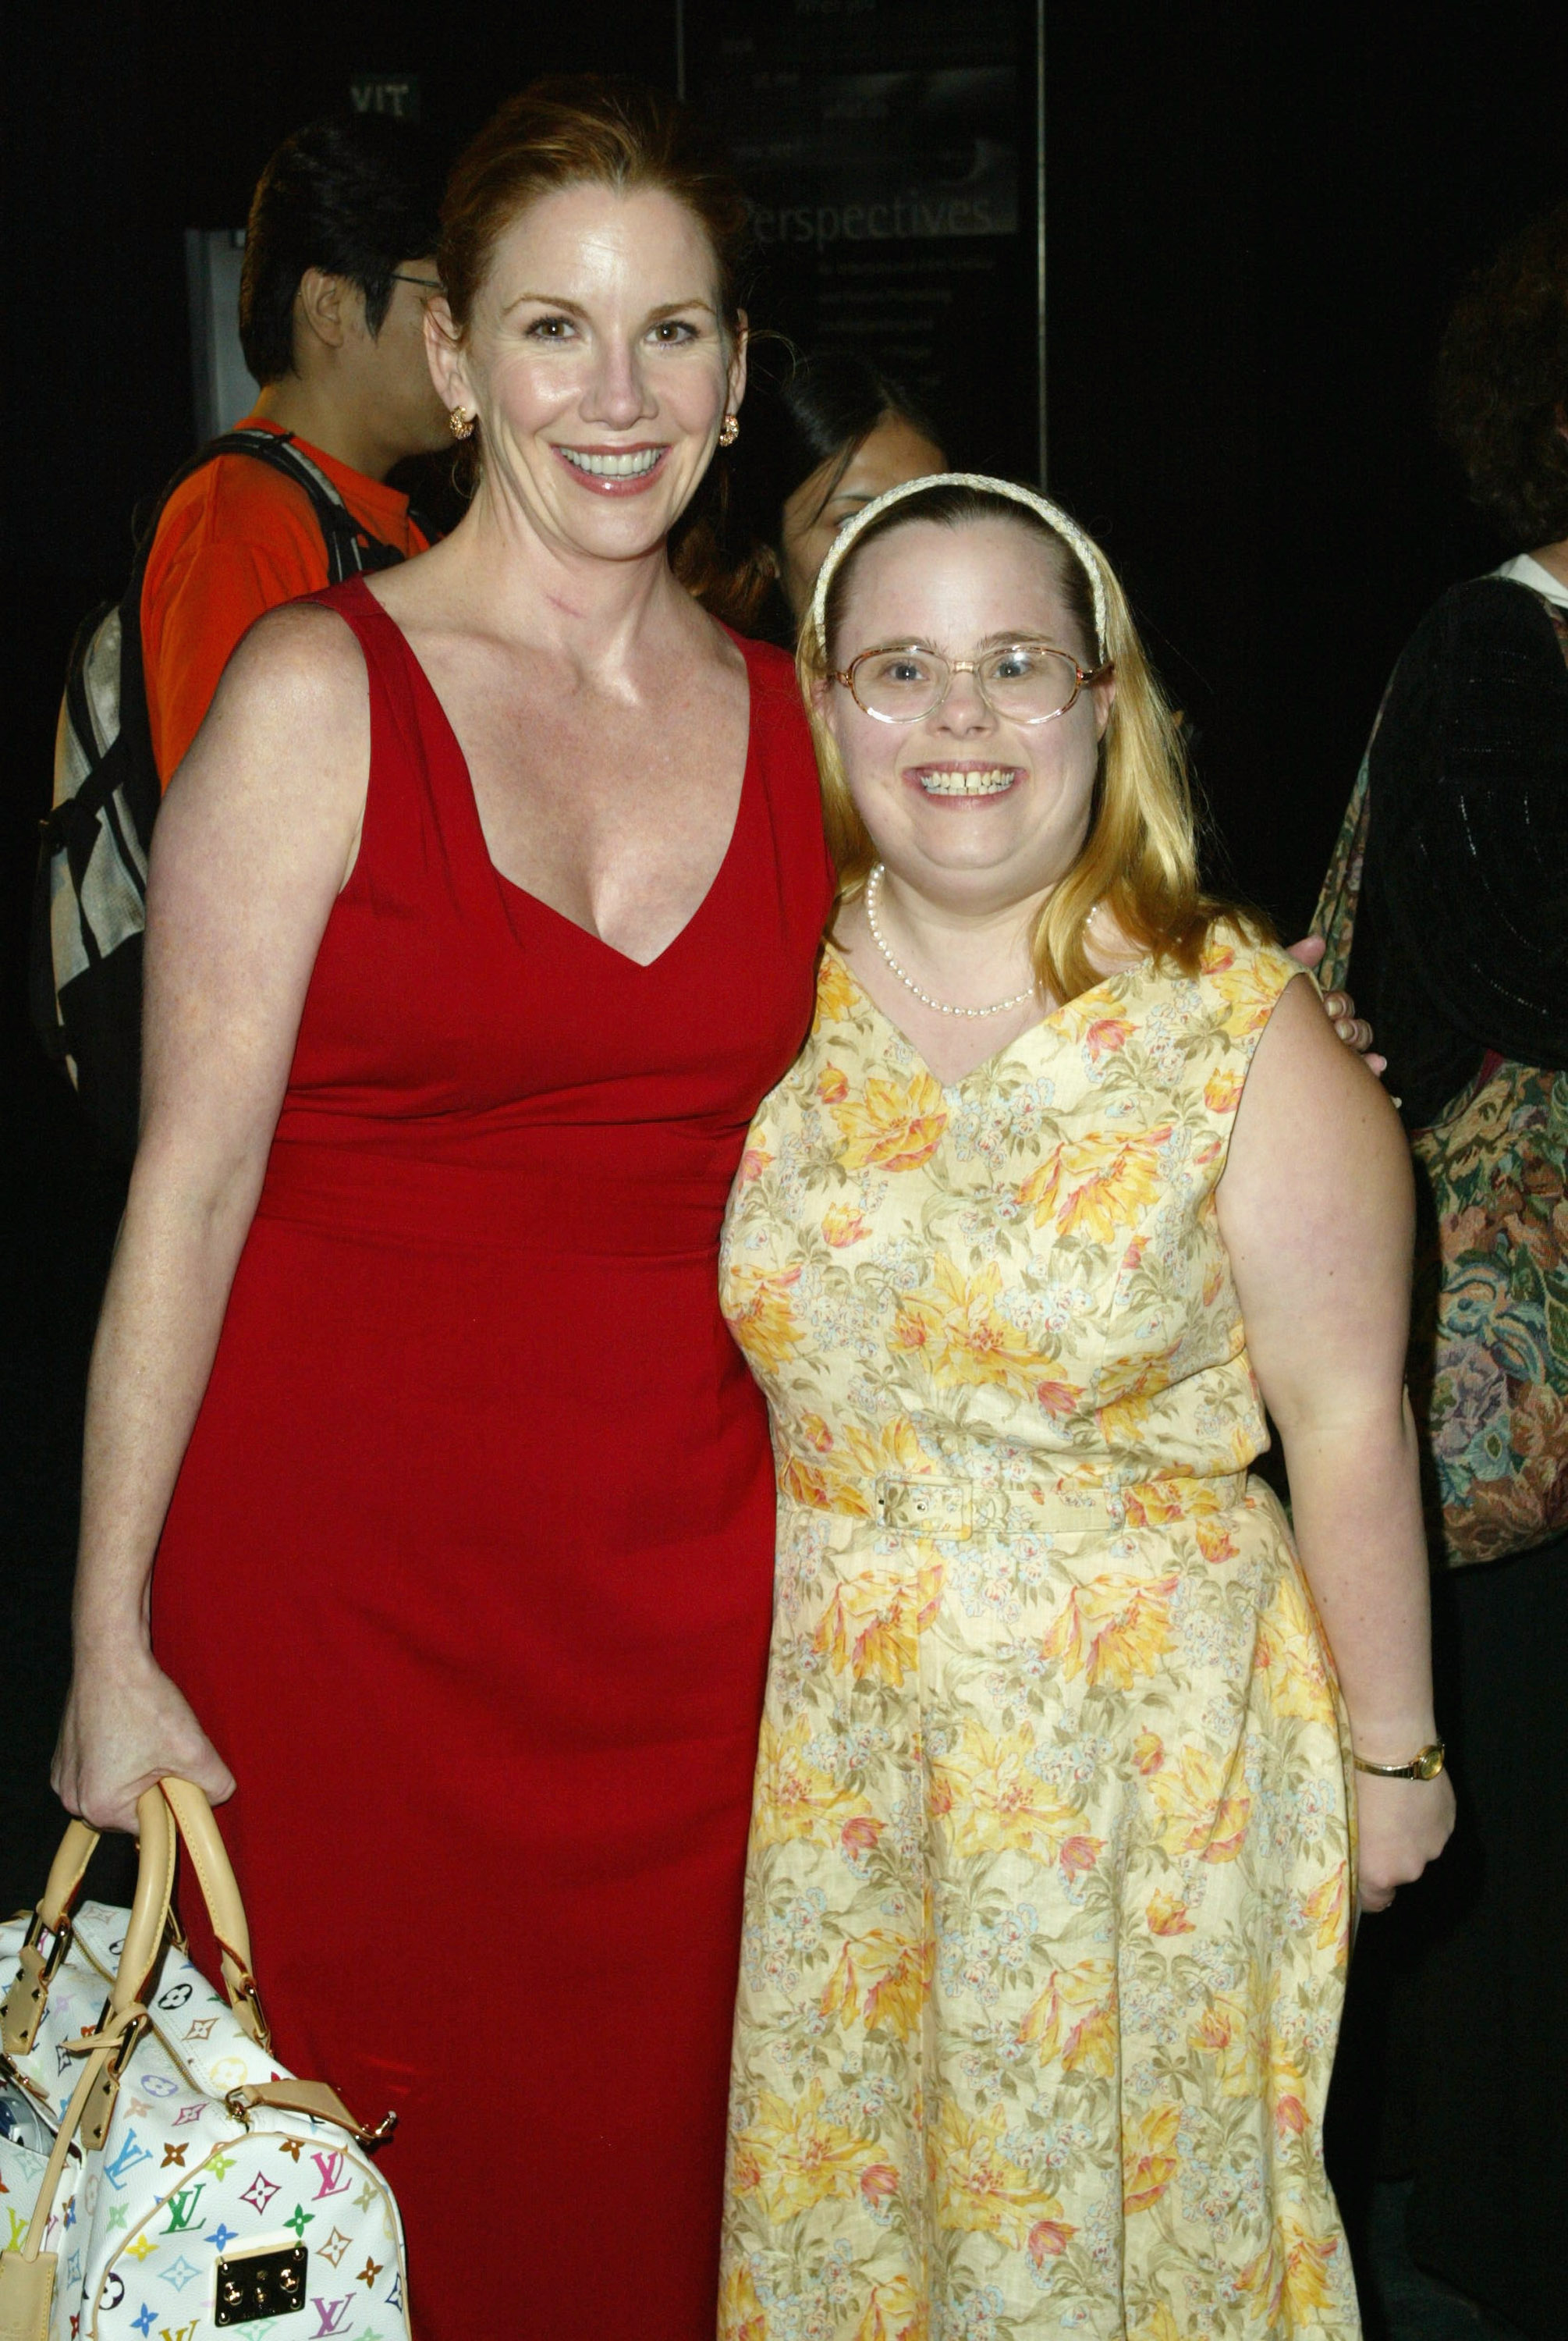 Melissa Gilbert and Andrea Fay Friedman at the International Film Festival and Forum at the ArcLight, Media Forum July 27, 2003 in Hollywood, California | Source: Getty Images